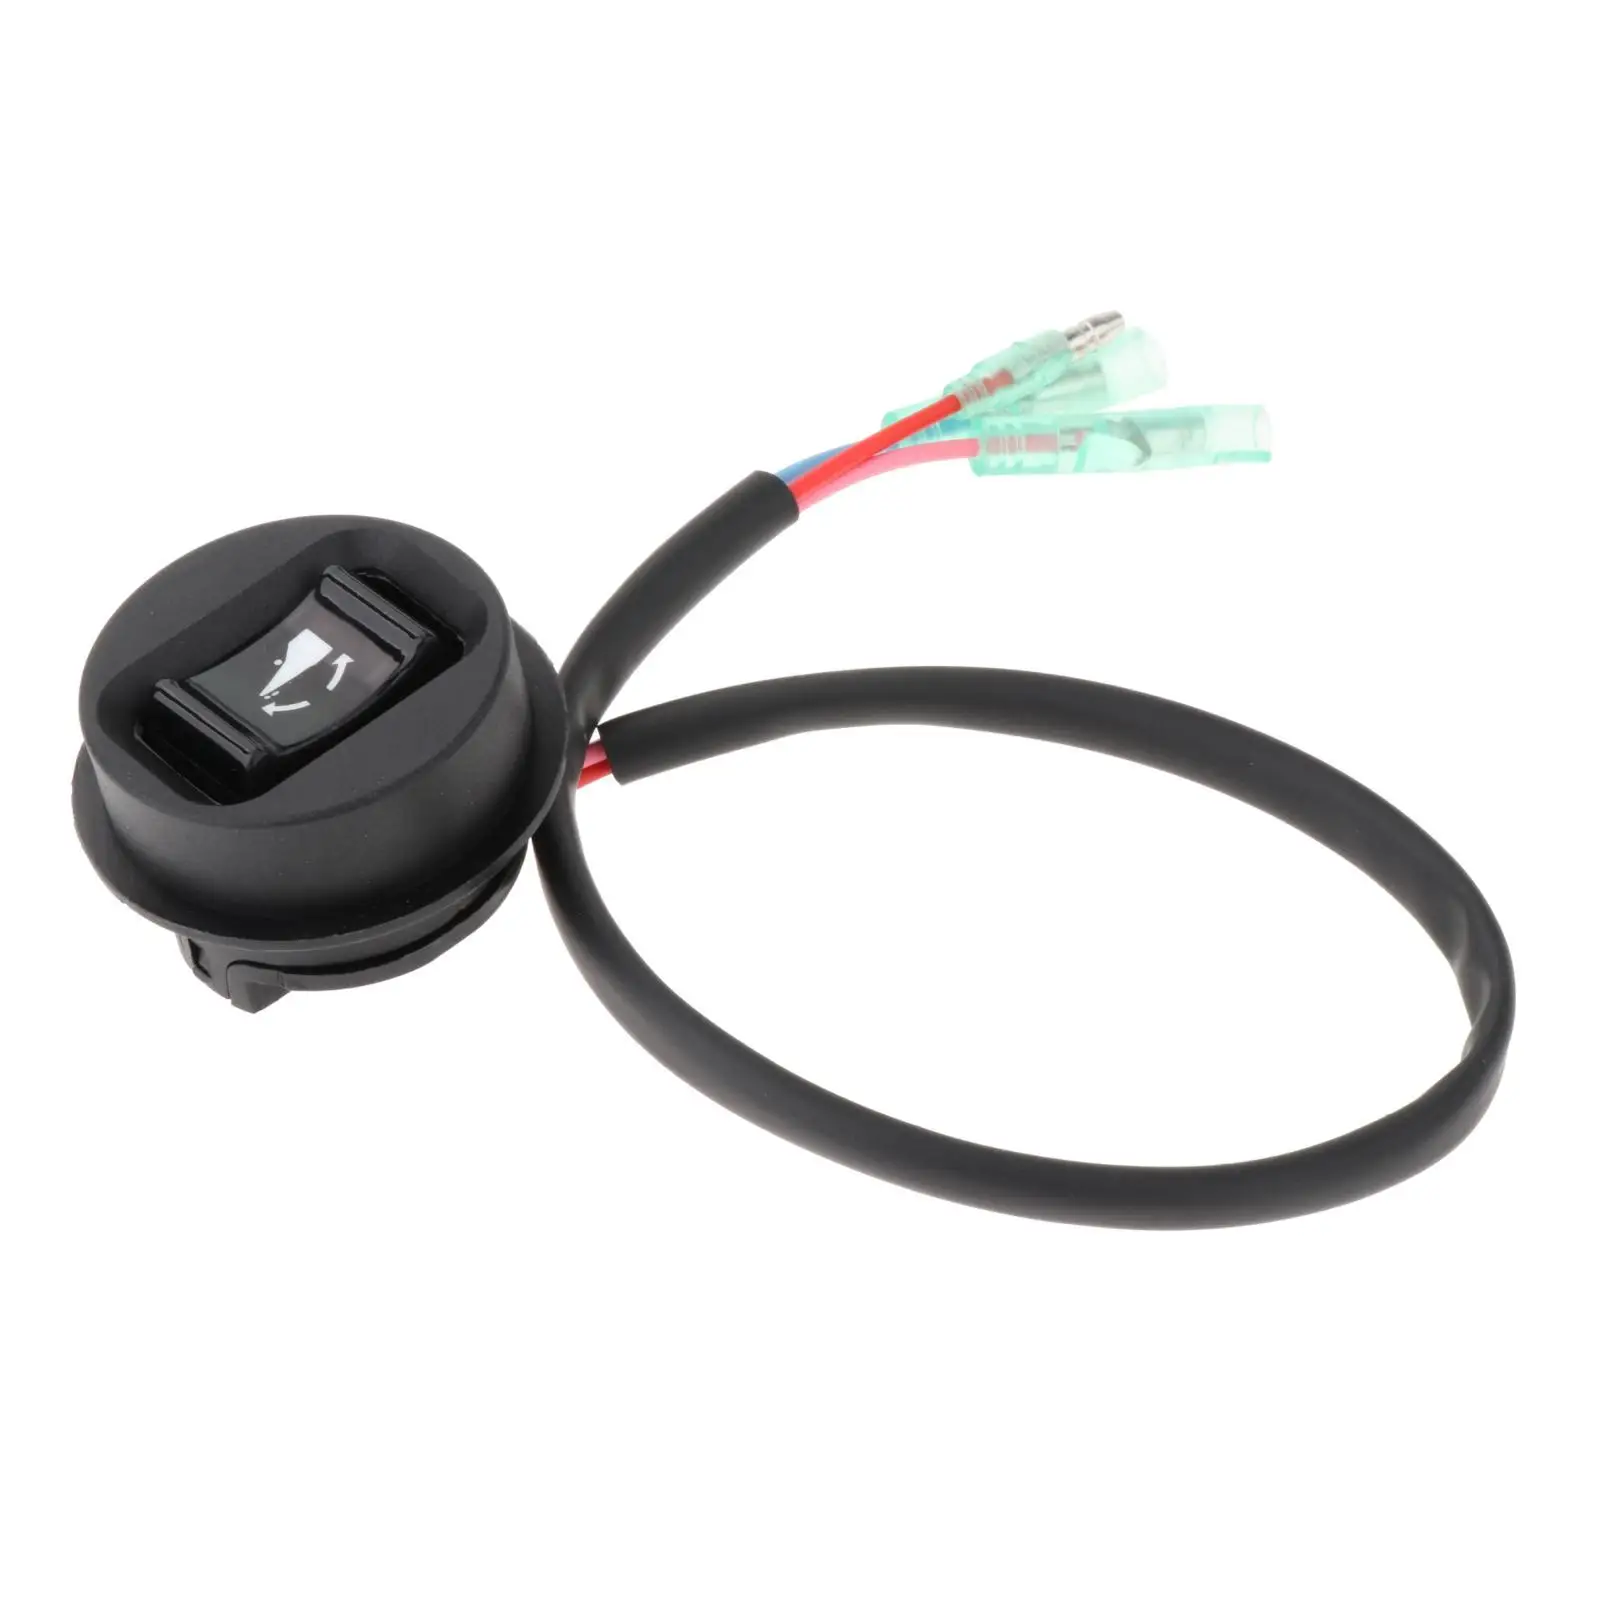 Power Tilt Trim Switch Fit for Tohatsu Outboard Motor 25HP 70HP Parts Easy to Install